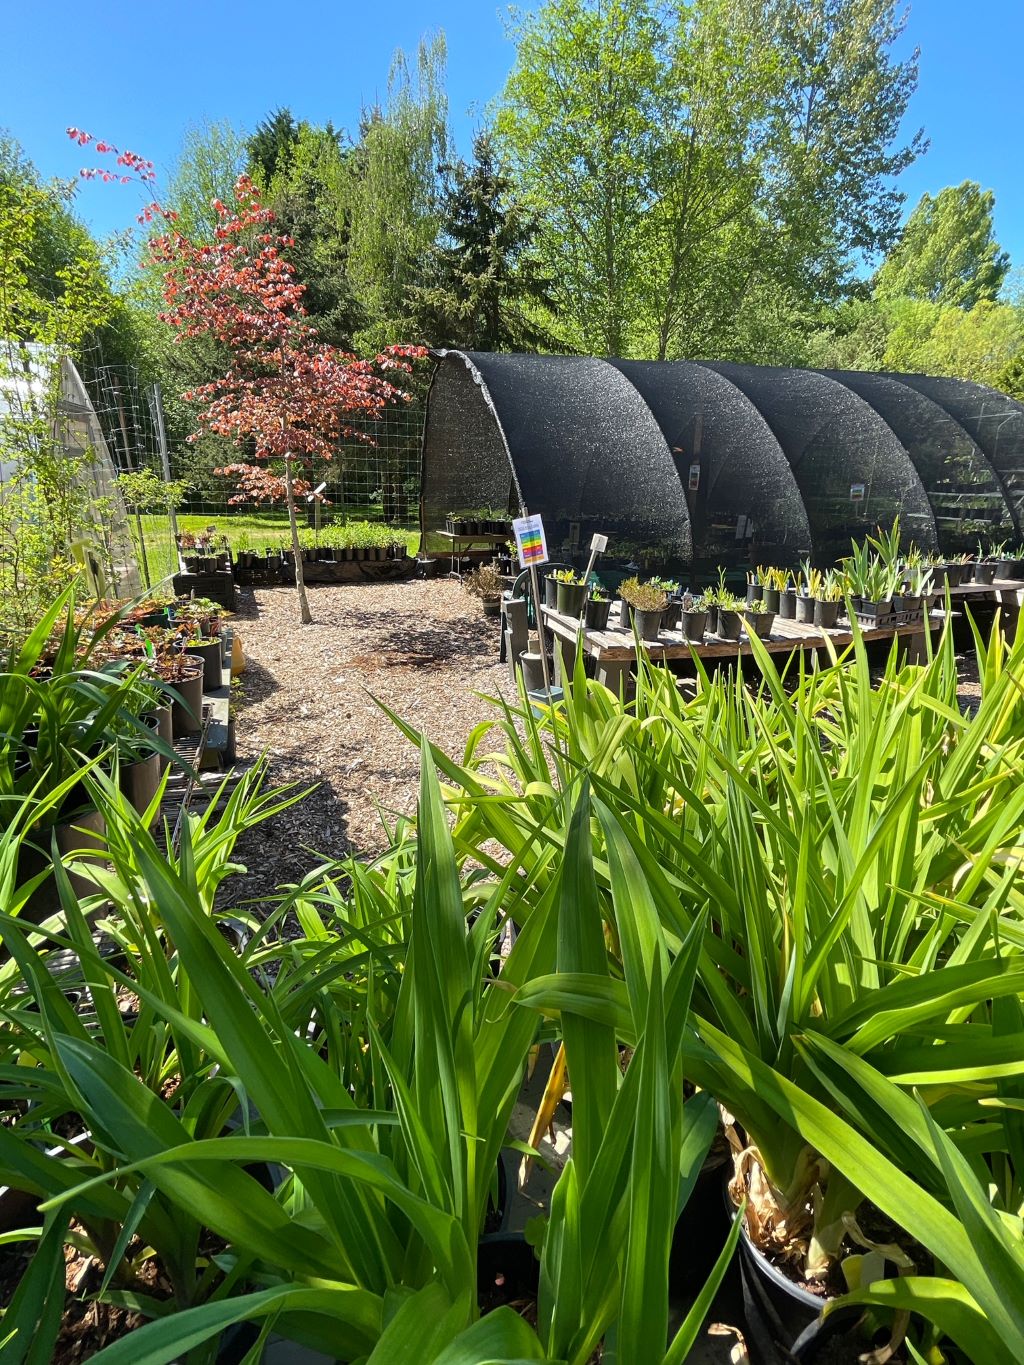 A photo of a black tarp-covered hoop house containing shade plants is surrounded by other plants and potted fowers for sale.